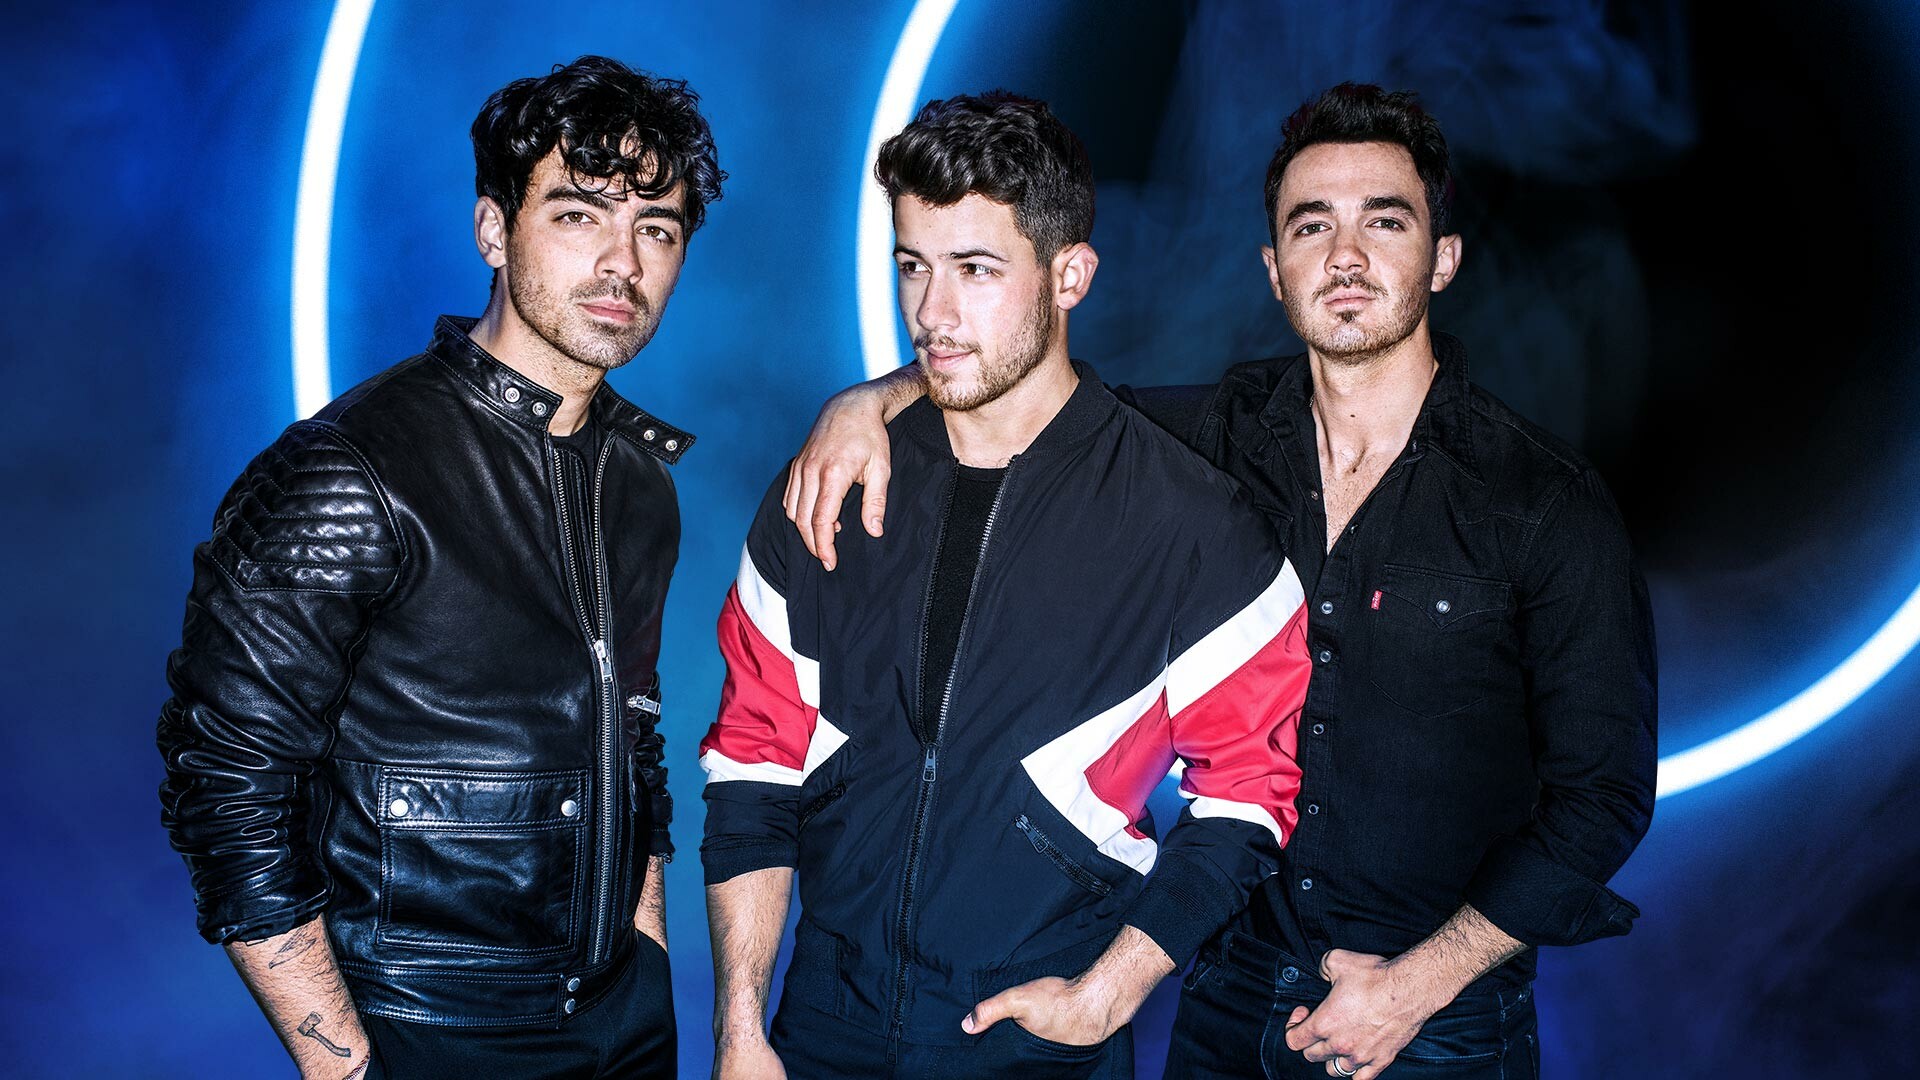 Jonas Brothers: Their album Lines, Vines and Trying Times debuted at number one on the Billboard 200. 1920x1080 Full HD Wallpaper.